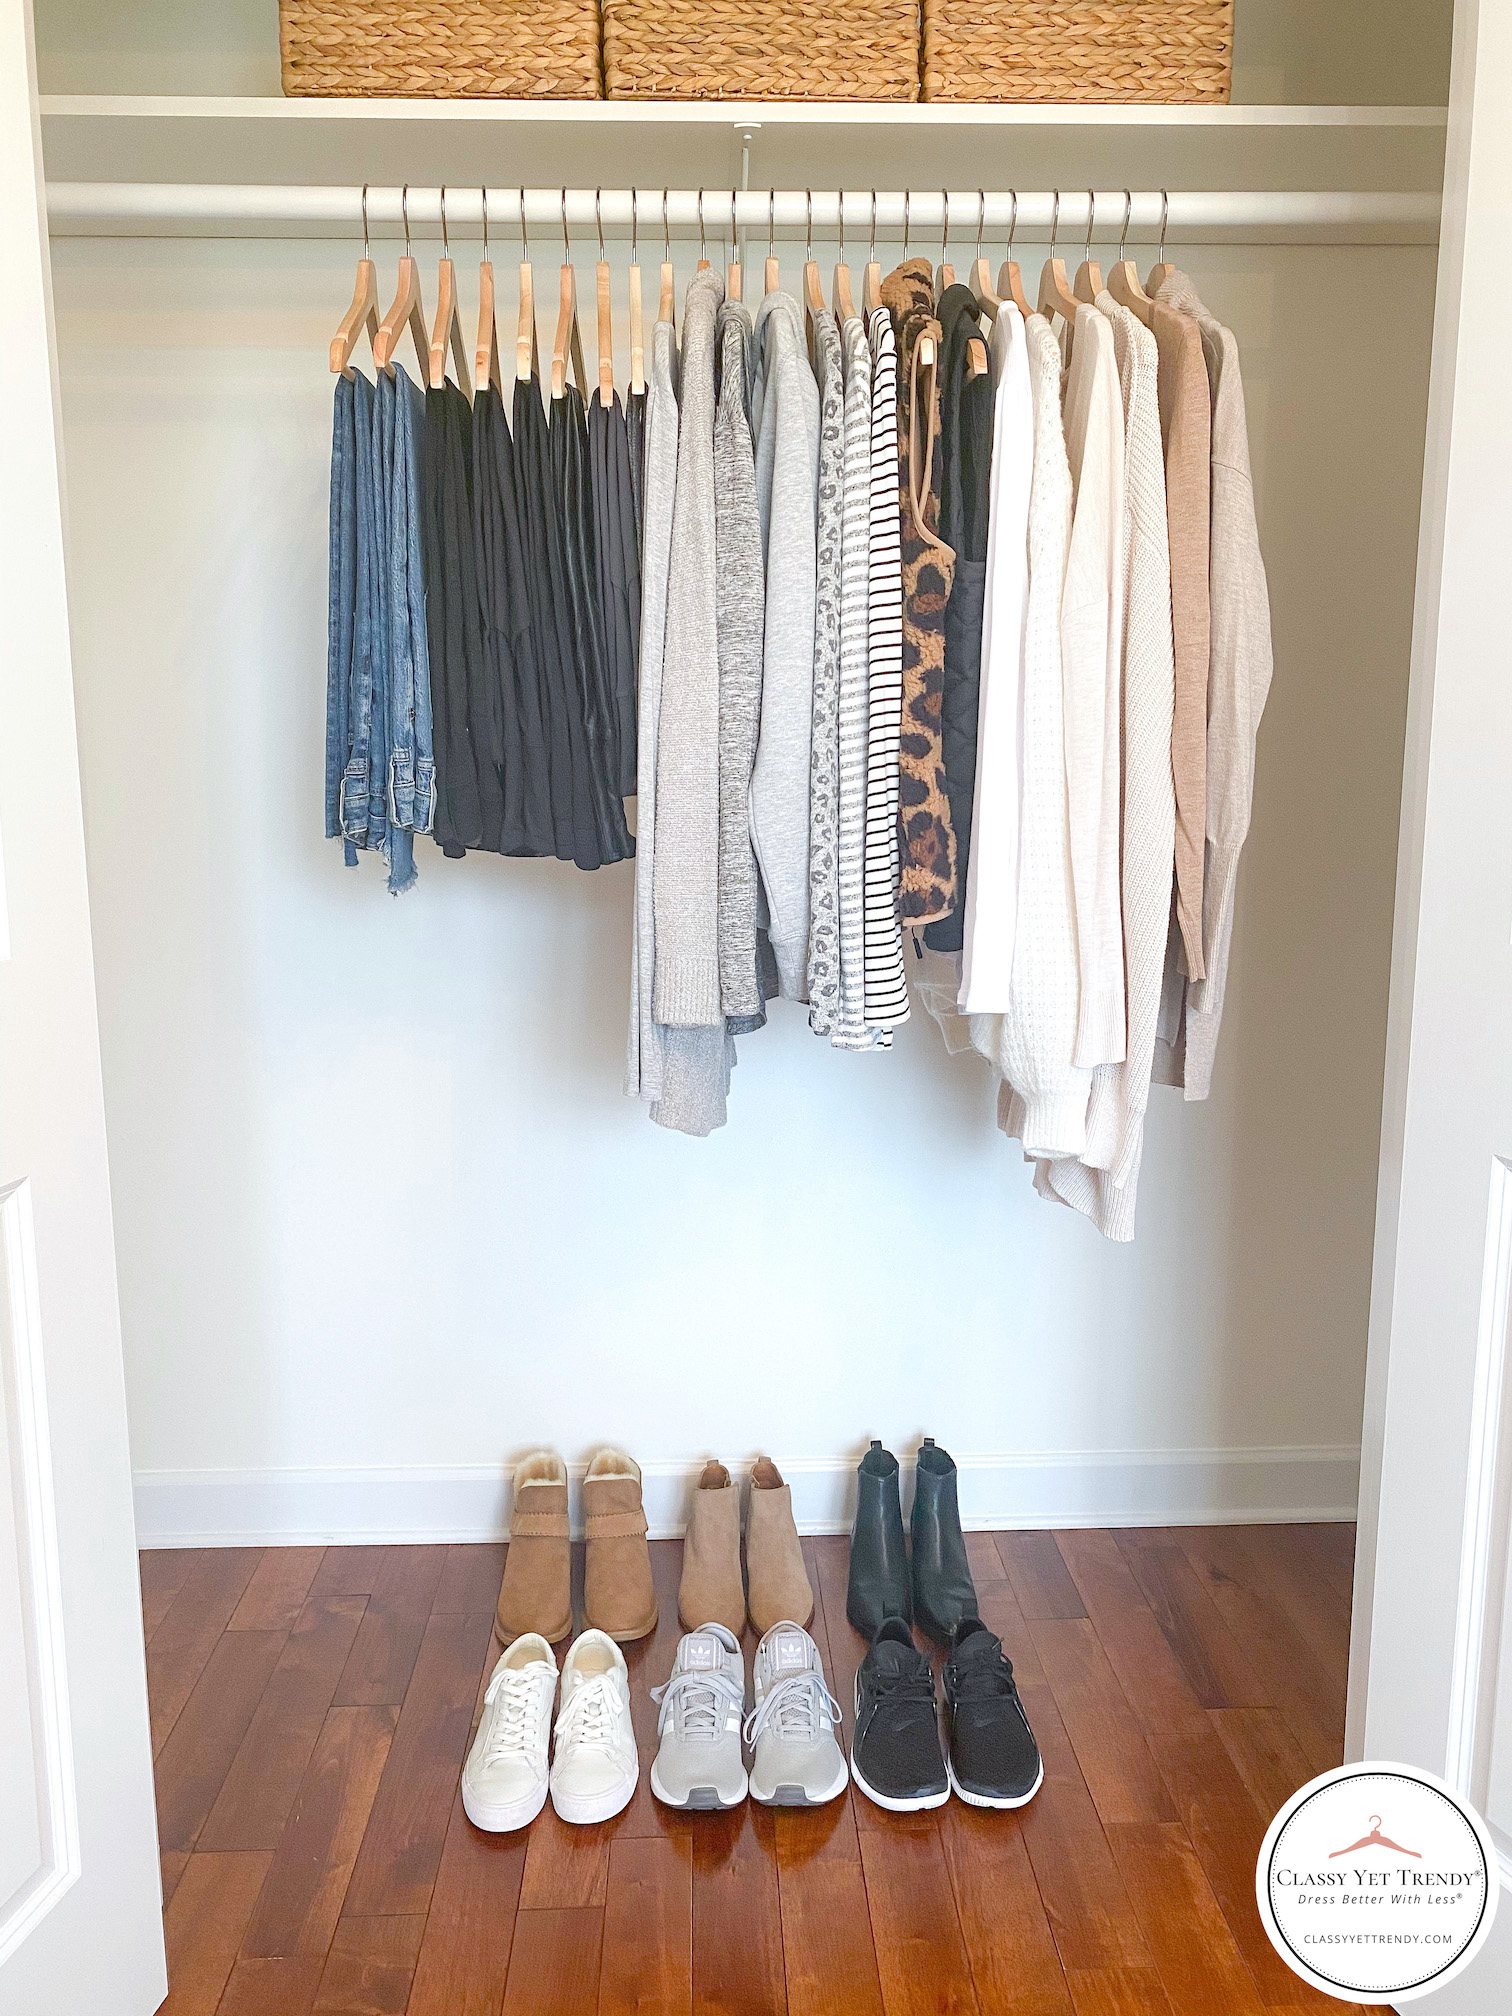 My capsule wardrobe for winter in the PNW. I had too much fun making this!  Not included: gym/hiking clothes or loungewear. : r/capsulewardrobe